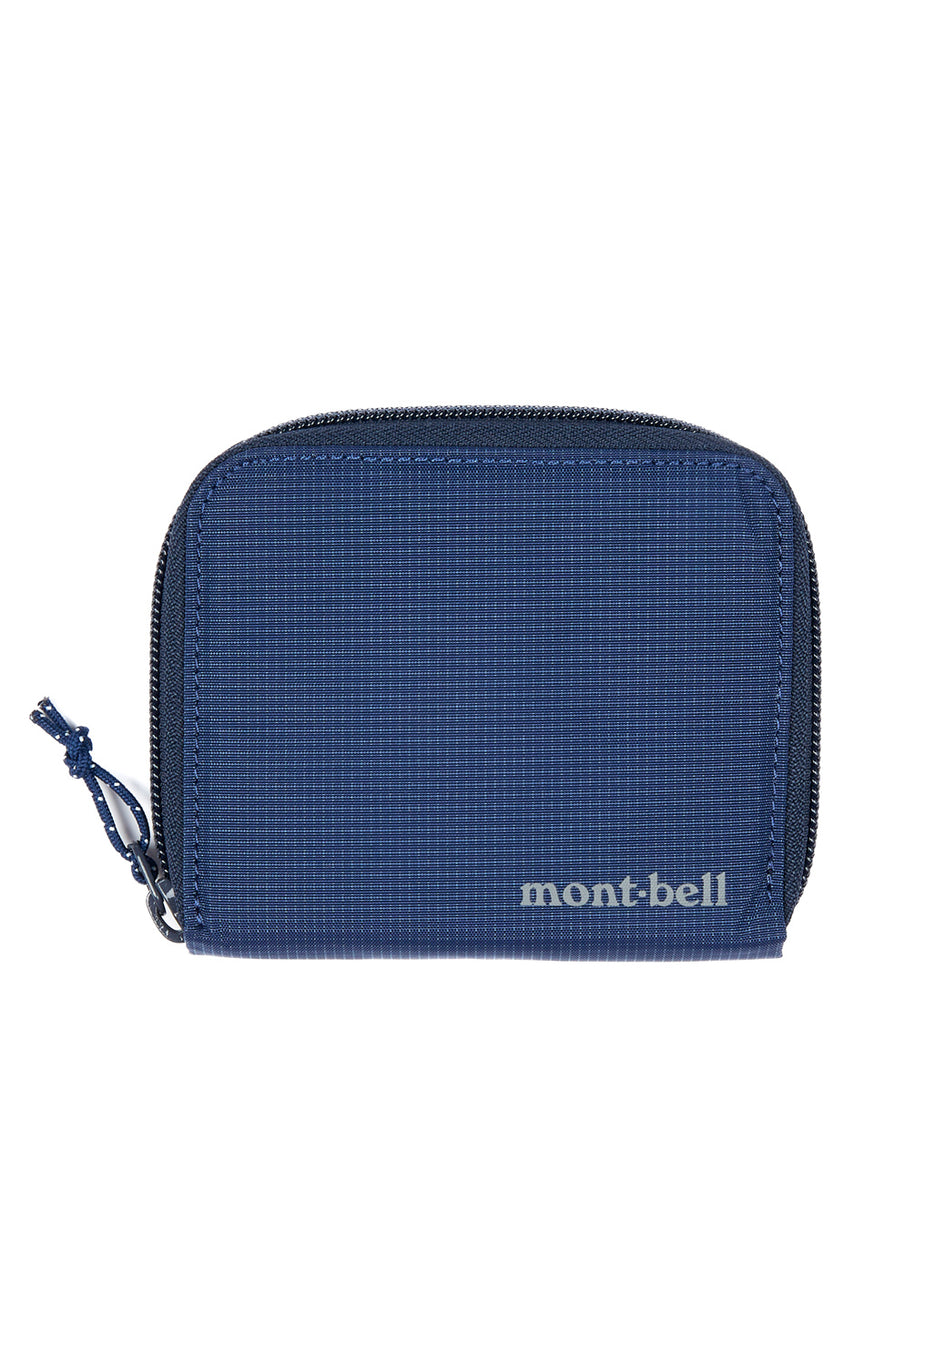 Montbell Zippered Wallet 1